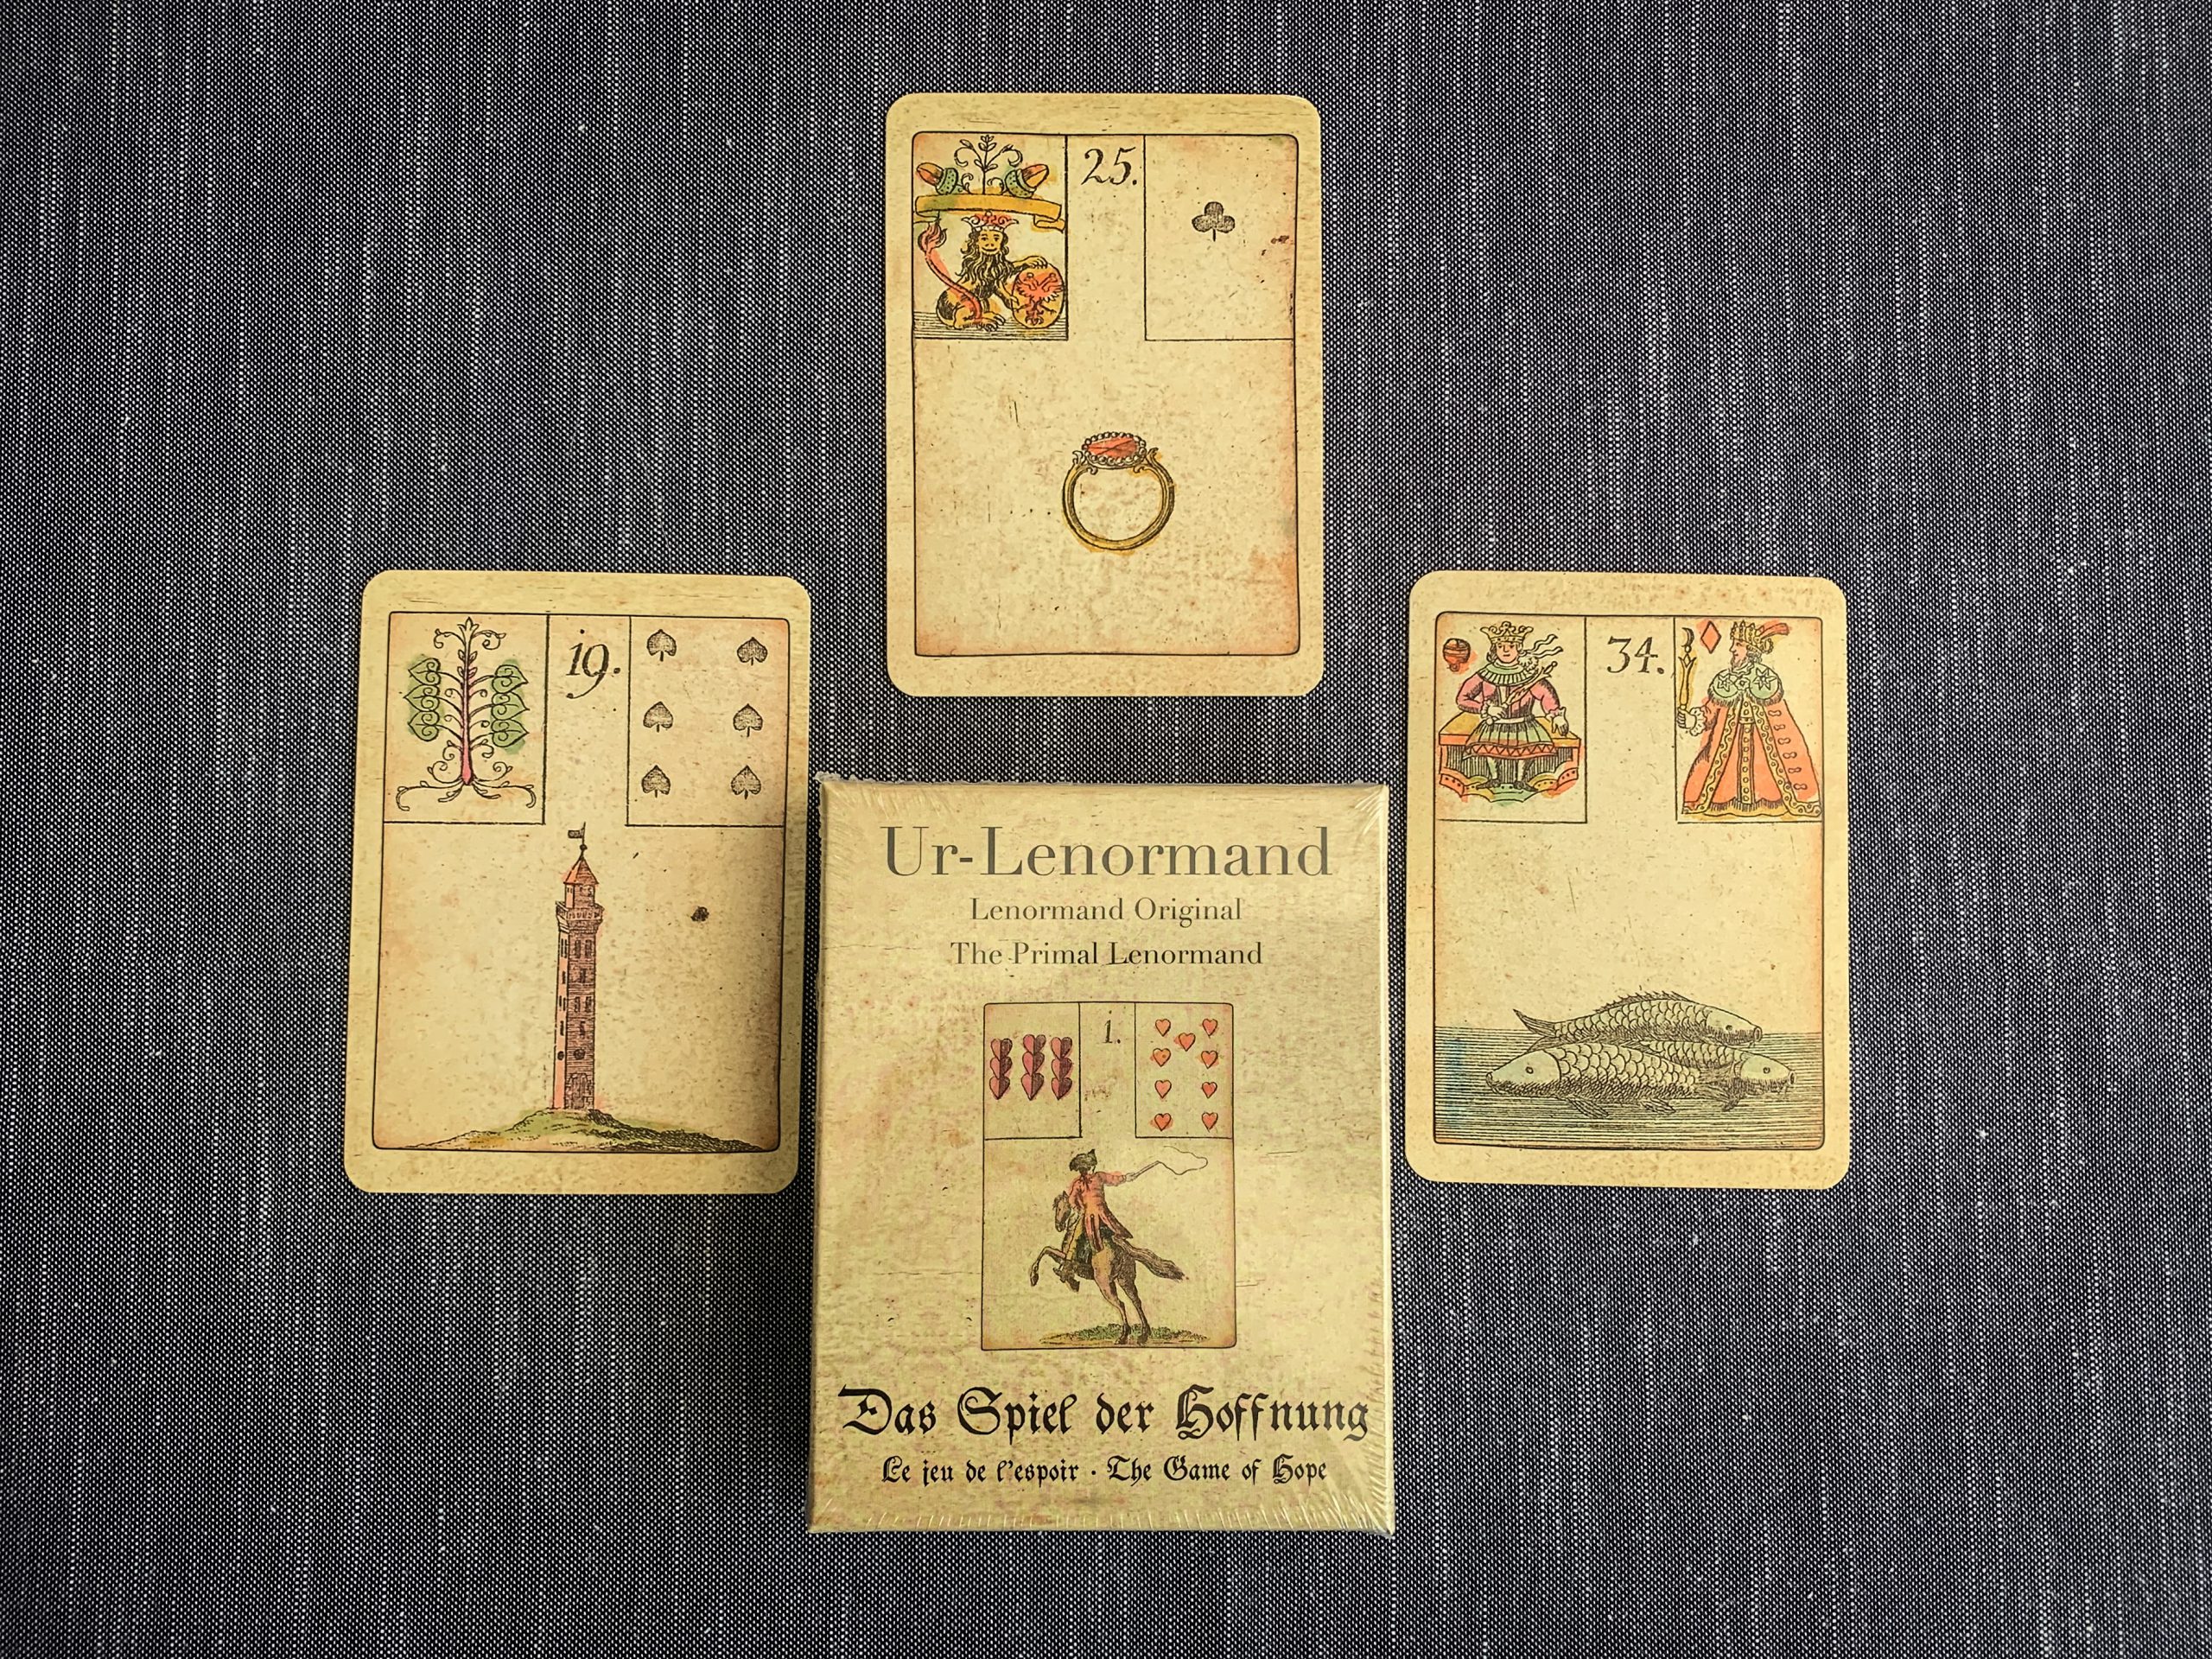 THE GAME OF HOPE ORACLE CARDS DECK ESOTERIC ASTROLOGY AGM NEW PRIMAL LENORMAND 